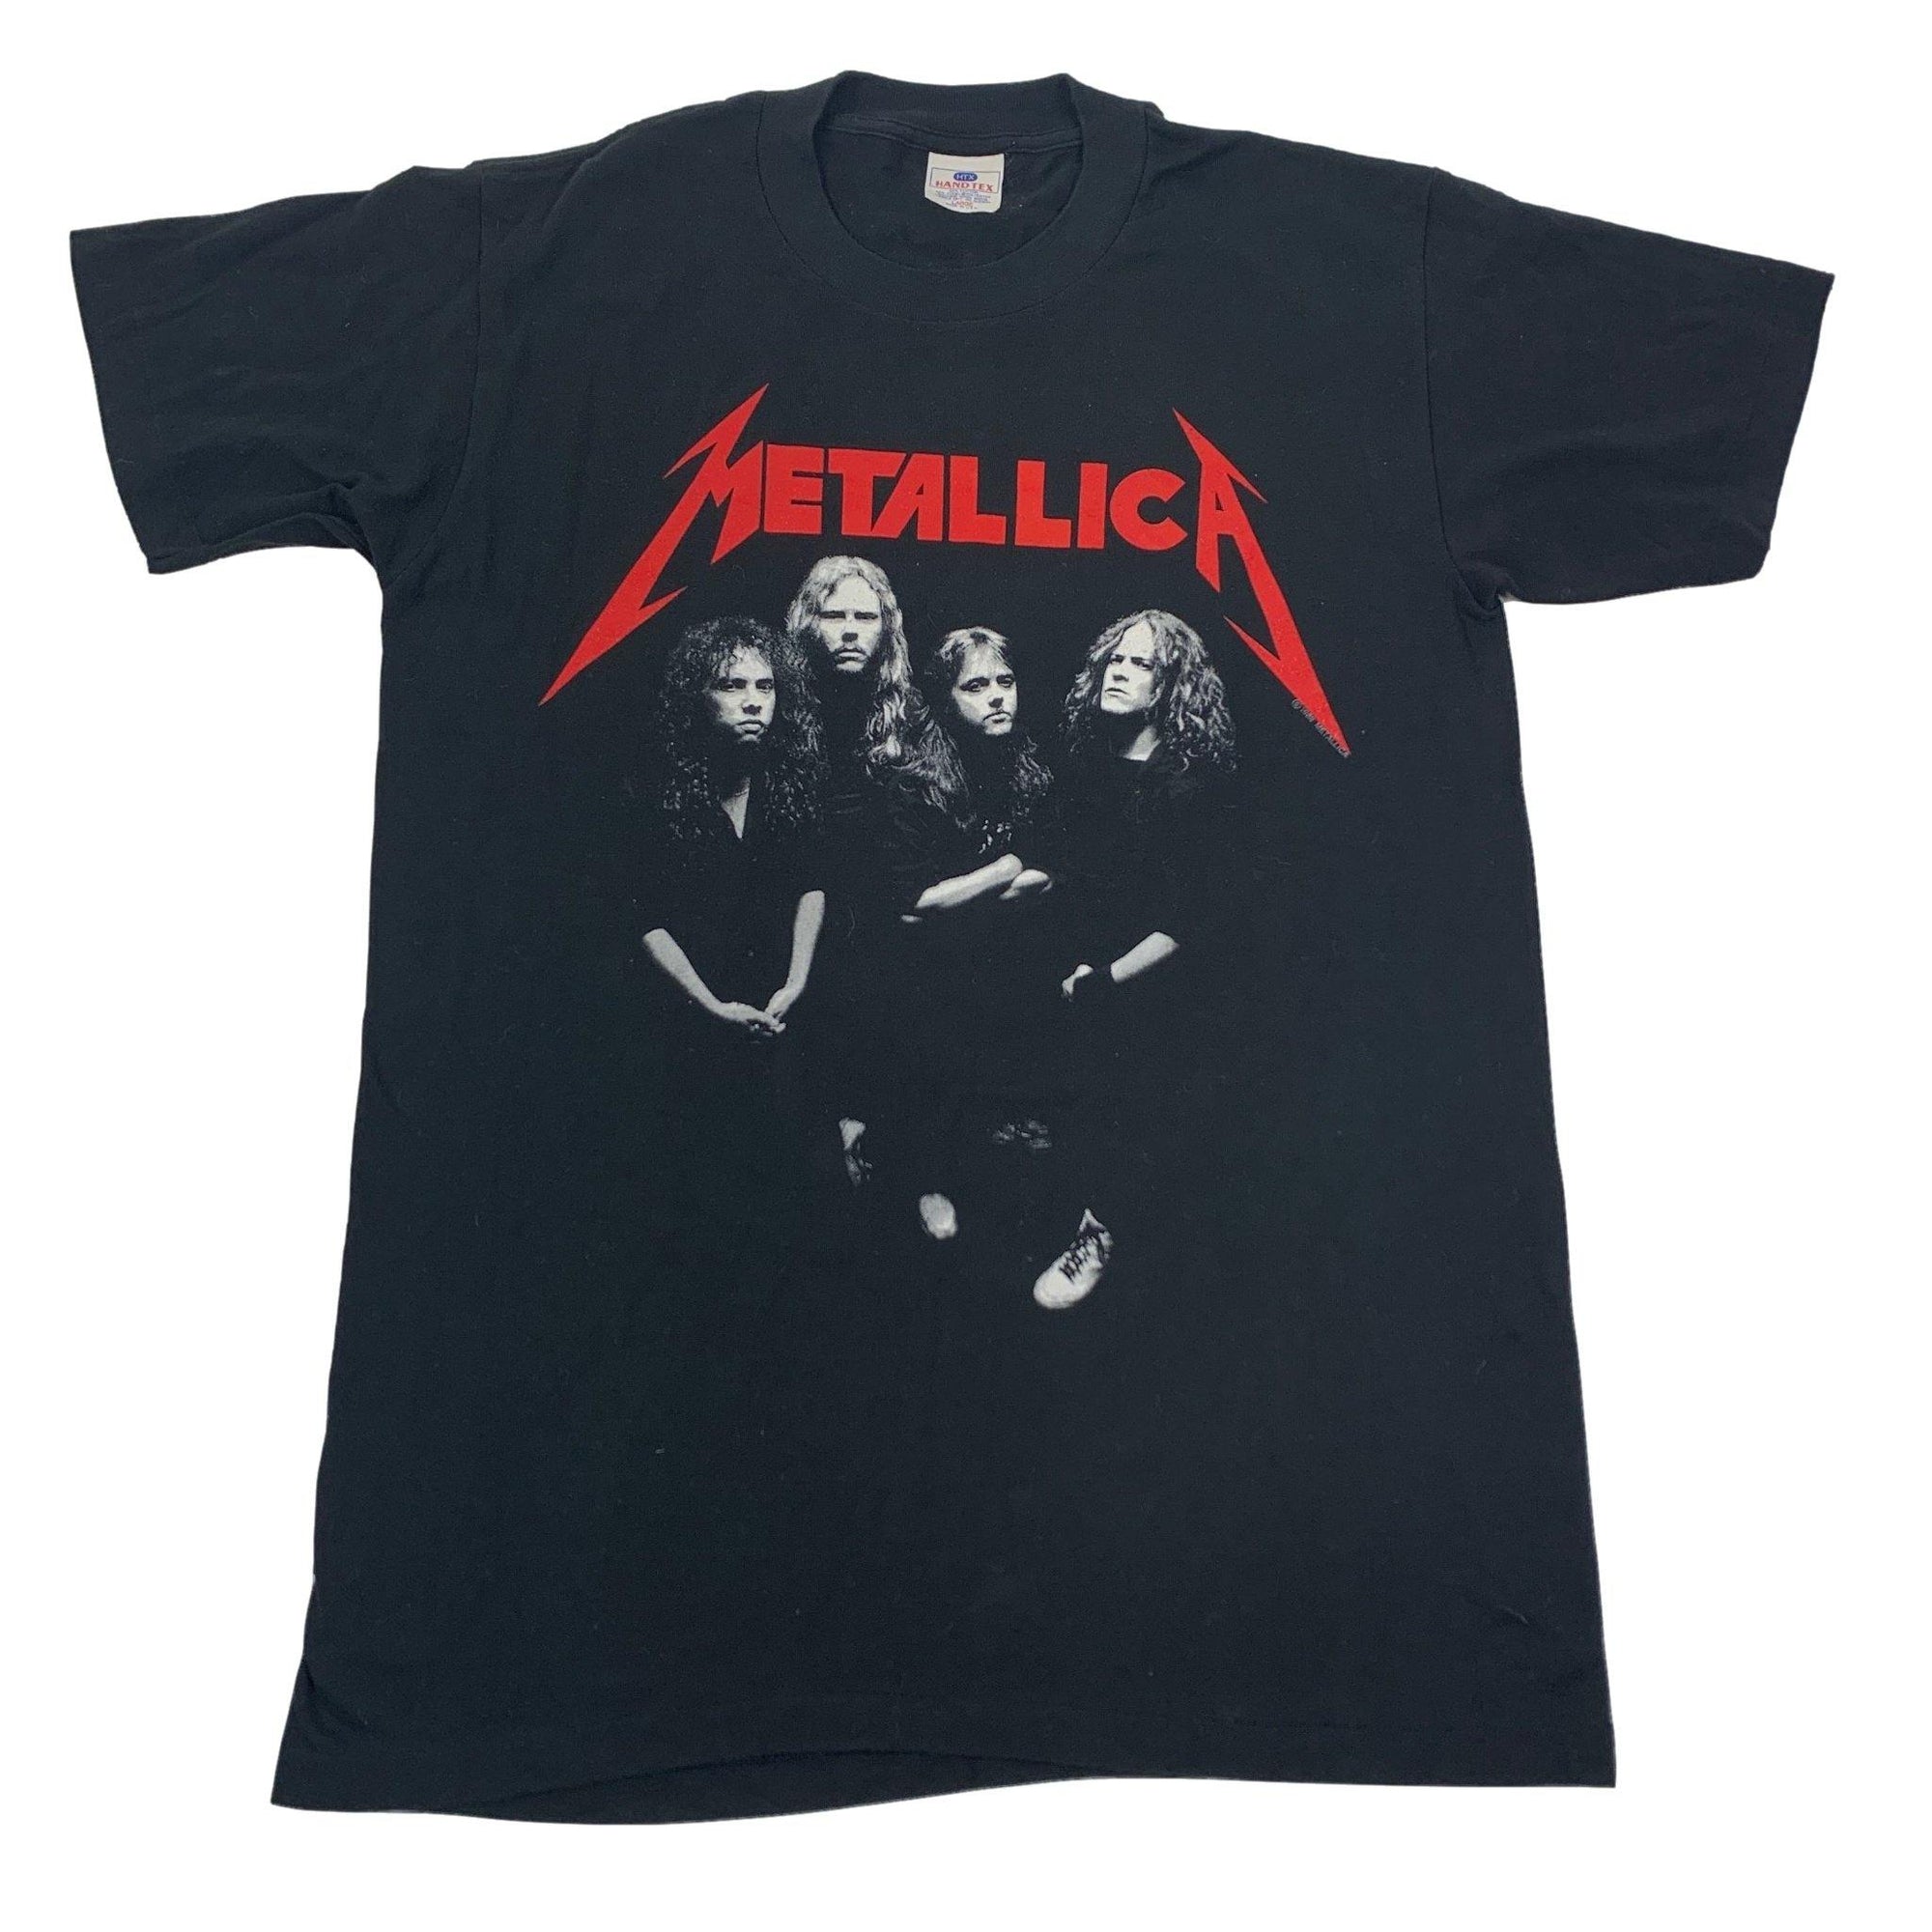 Vintage Metallica "...And Justice For All" T-Shirt - jointcustodydc